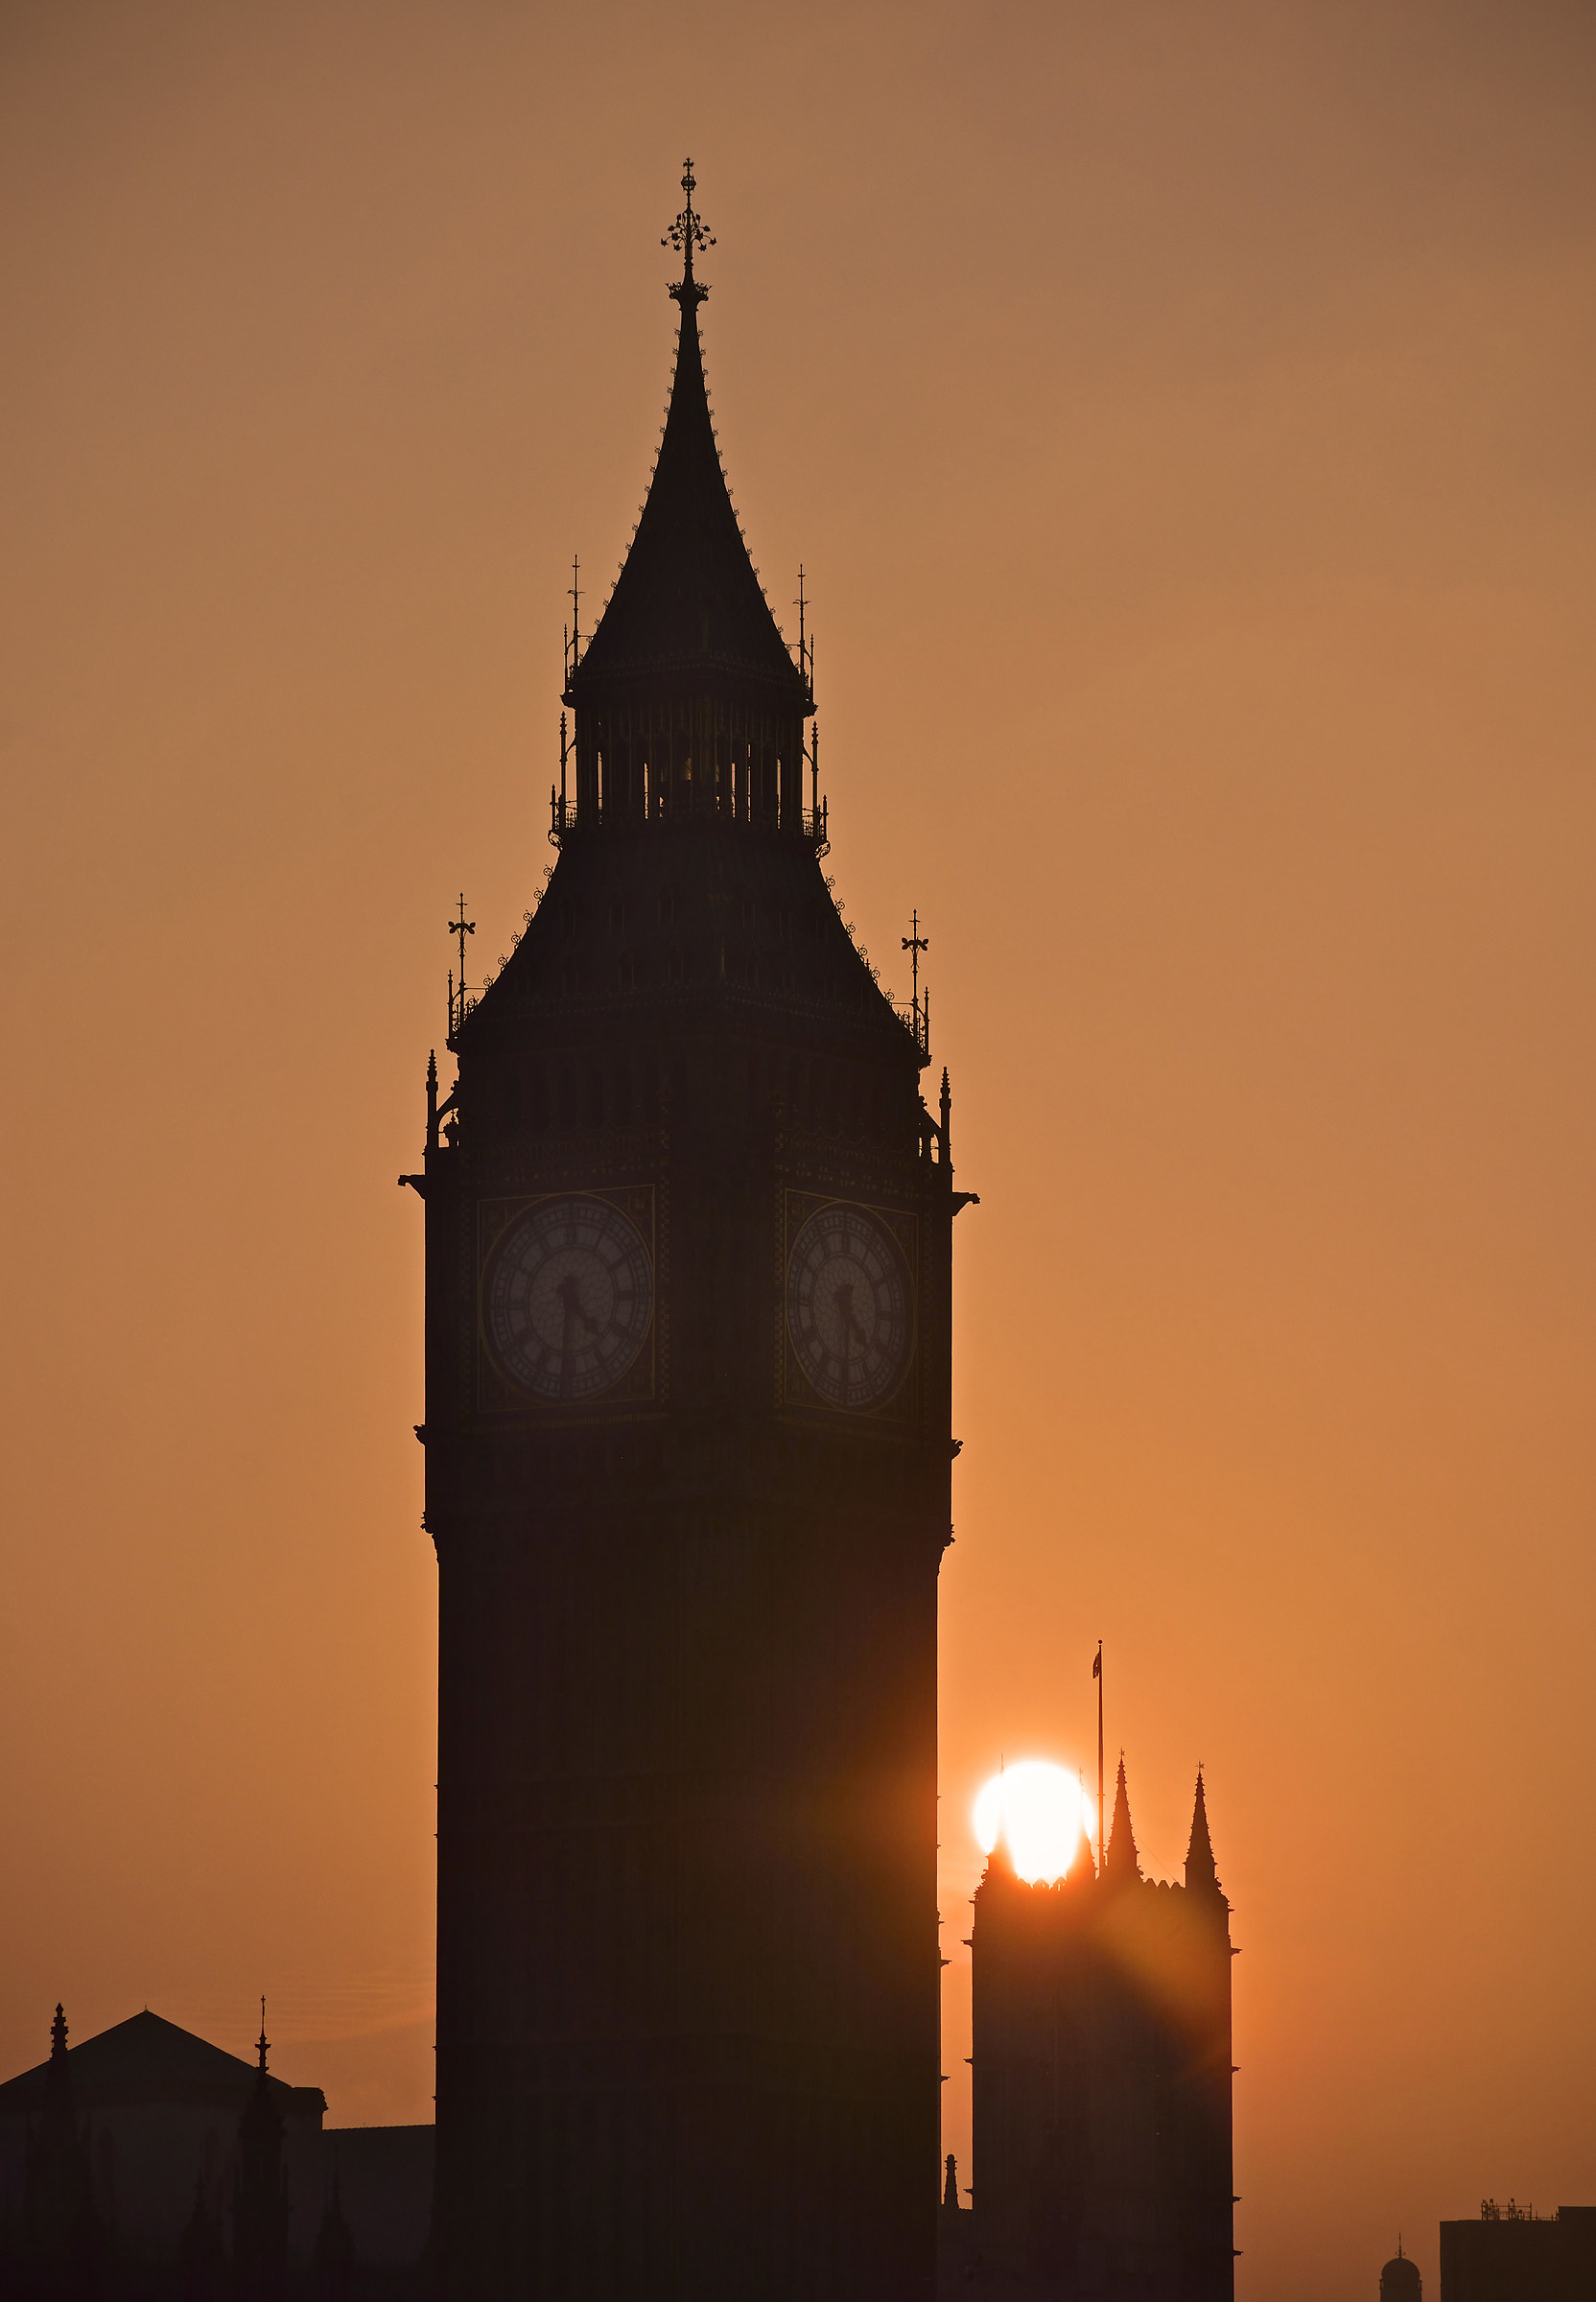 Winter's Sunset over Westminster Abbey (with Big Ben)...